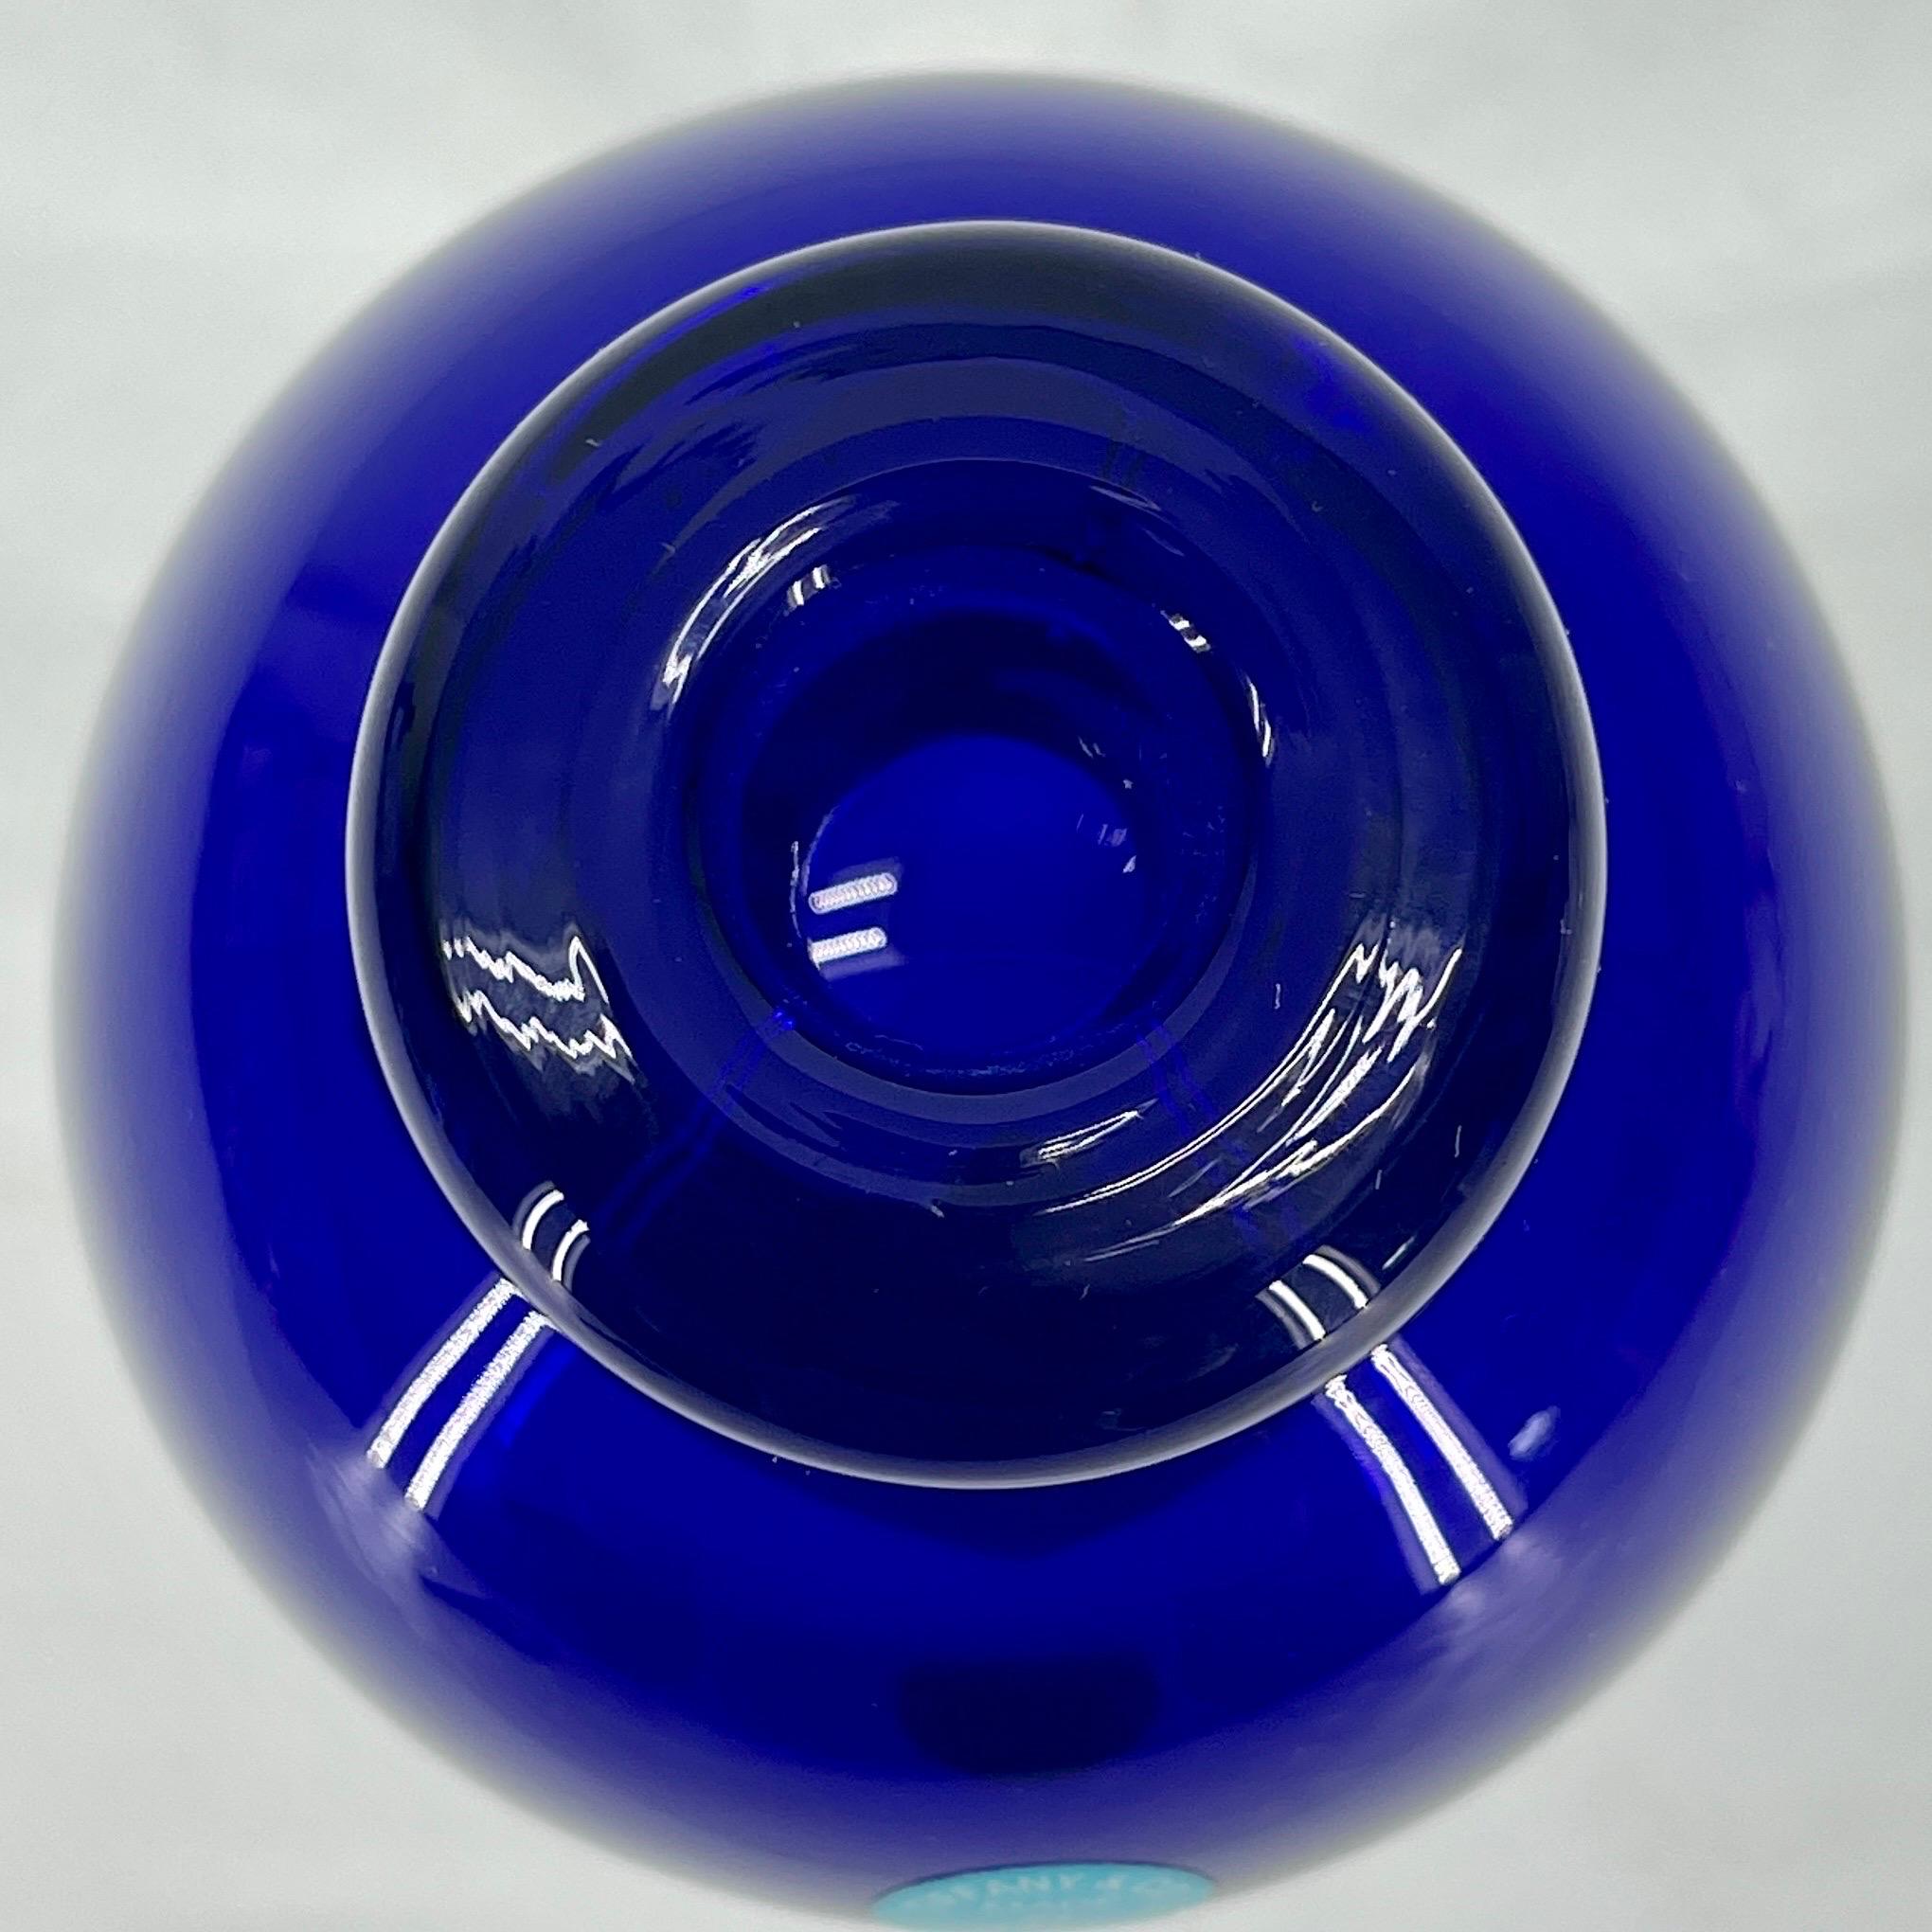 Hand-Crafted Small Italian Cobalt Blue Vase by Seguso Murano for Tiffany